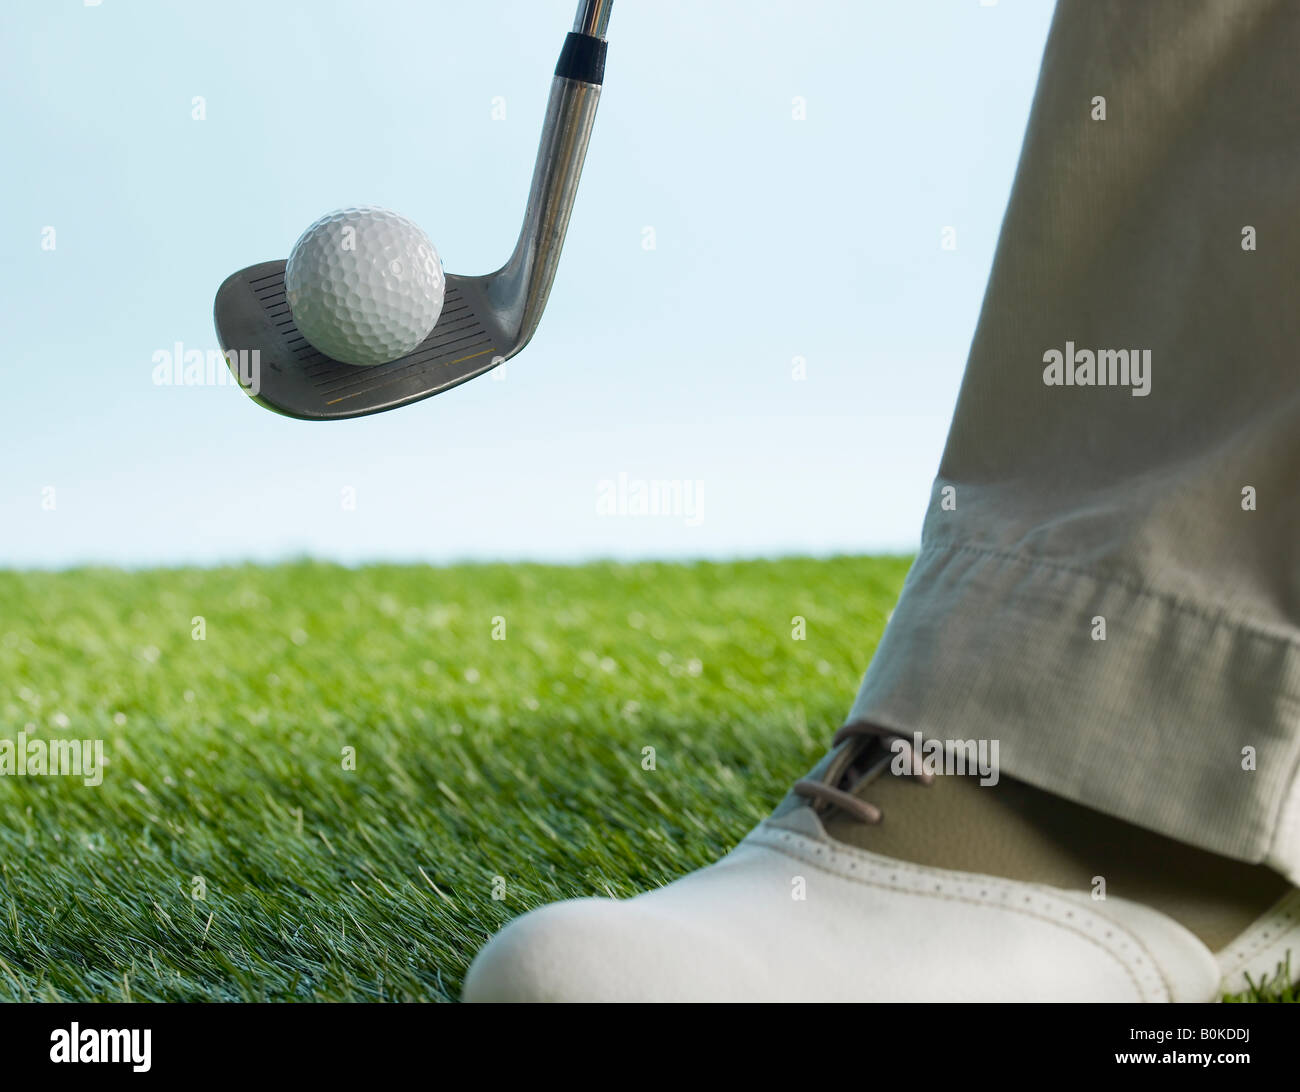 Golf Player Hitting Ball Banque D'Images